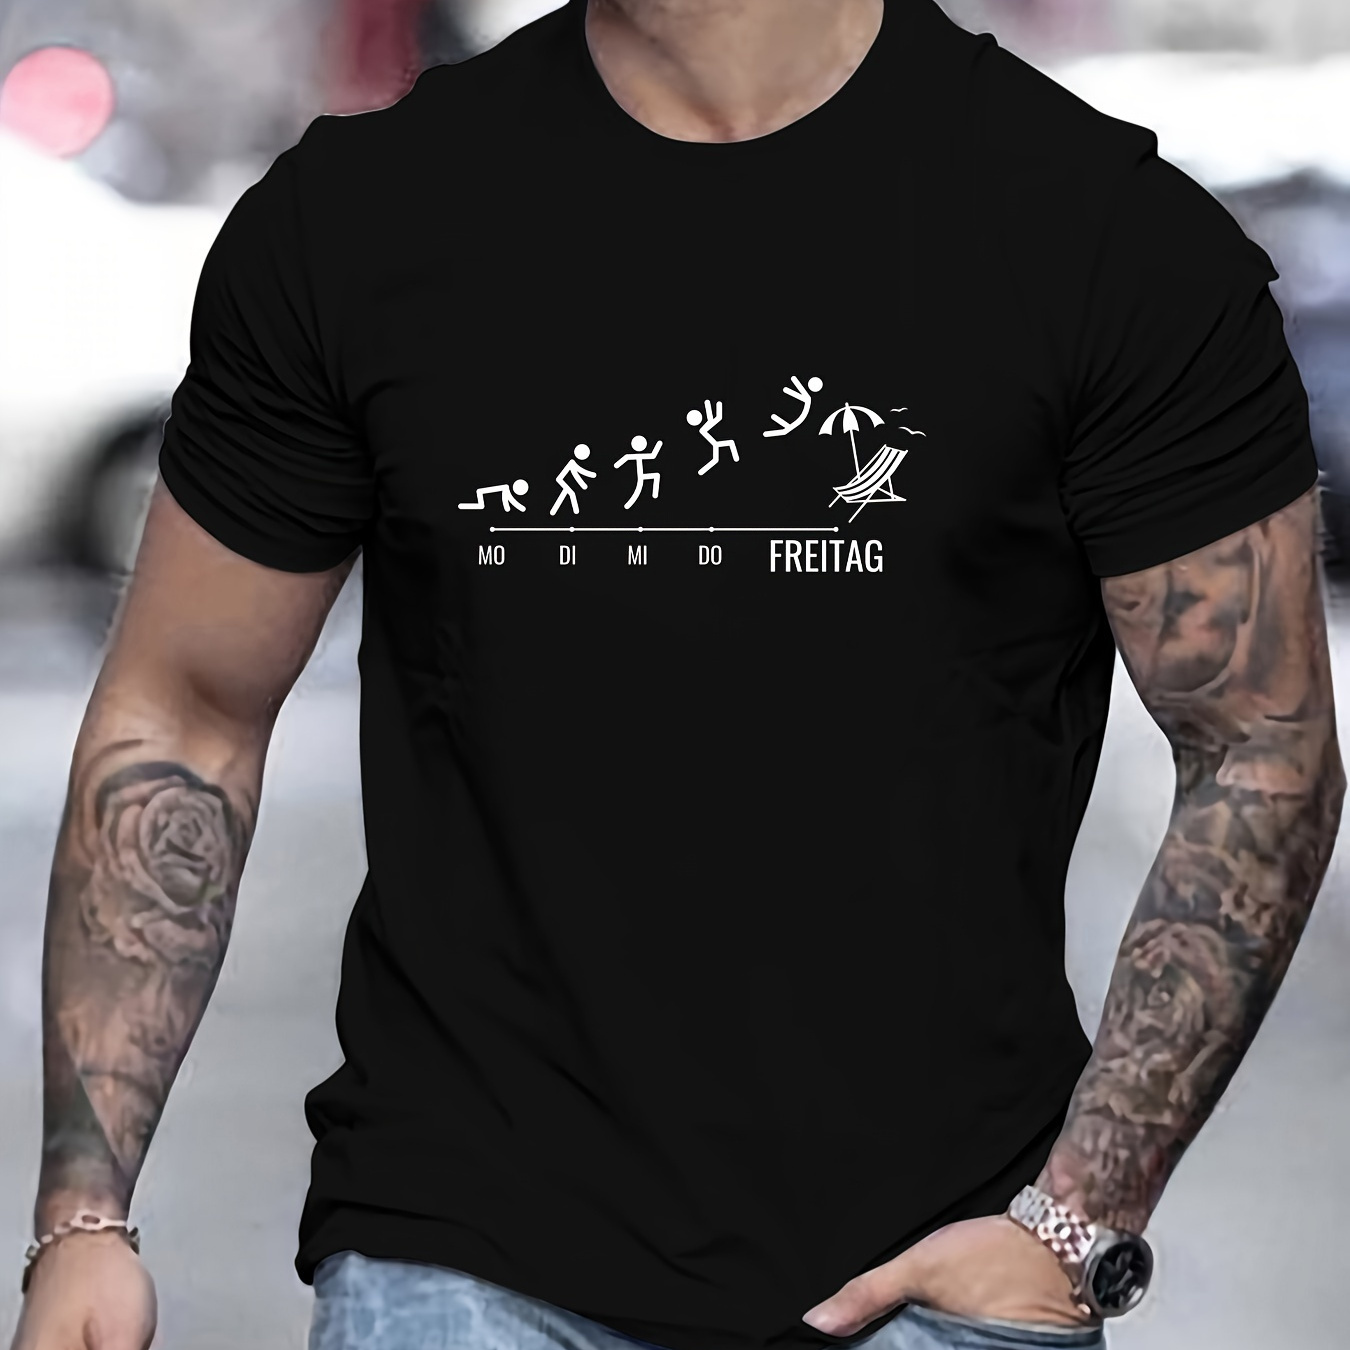 

Letters And Matchstick Figures Graphic Print, Men's Comfy Cotton T-shirt, Casual Fit Tee, Cool Top Clothing For Men For Summer For Everyday Activities